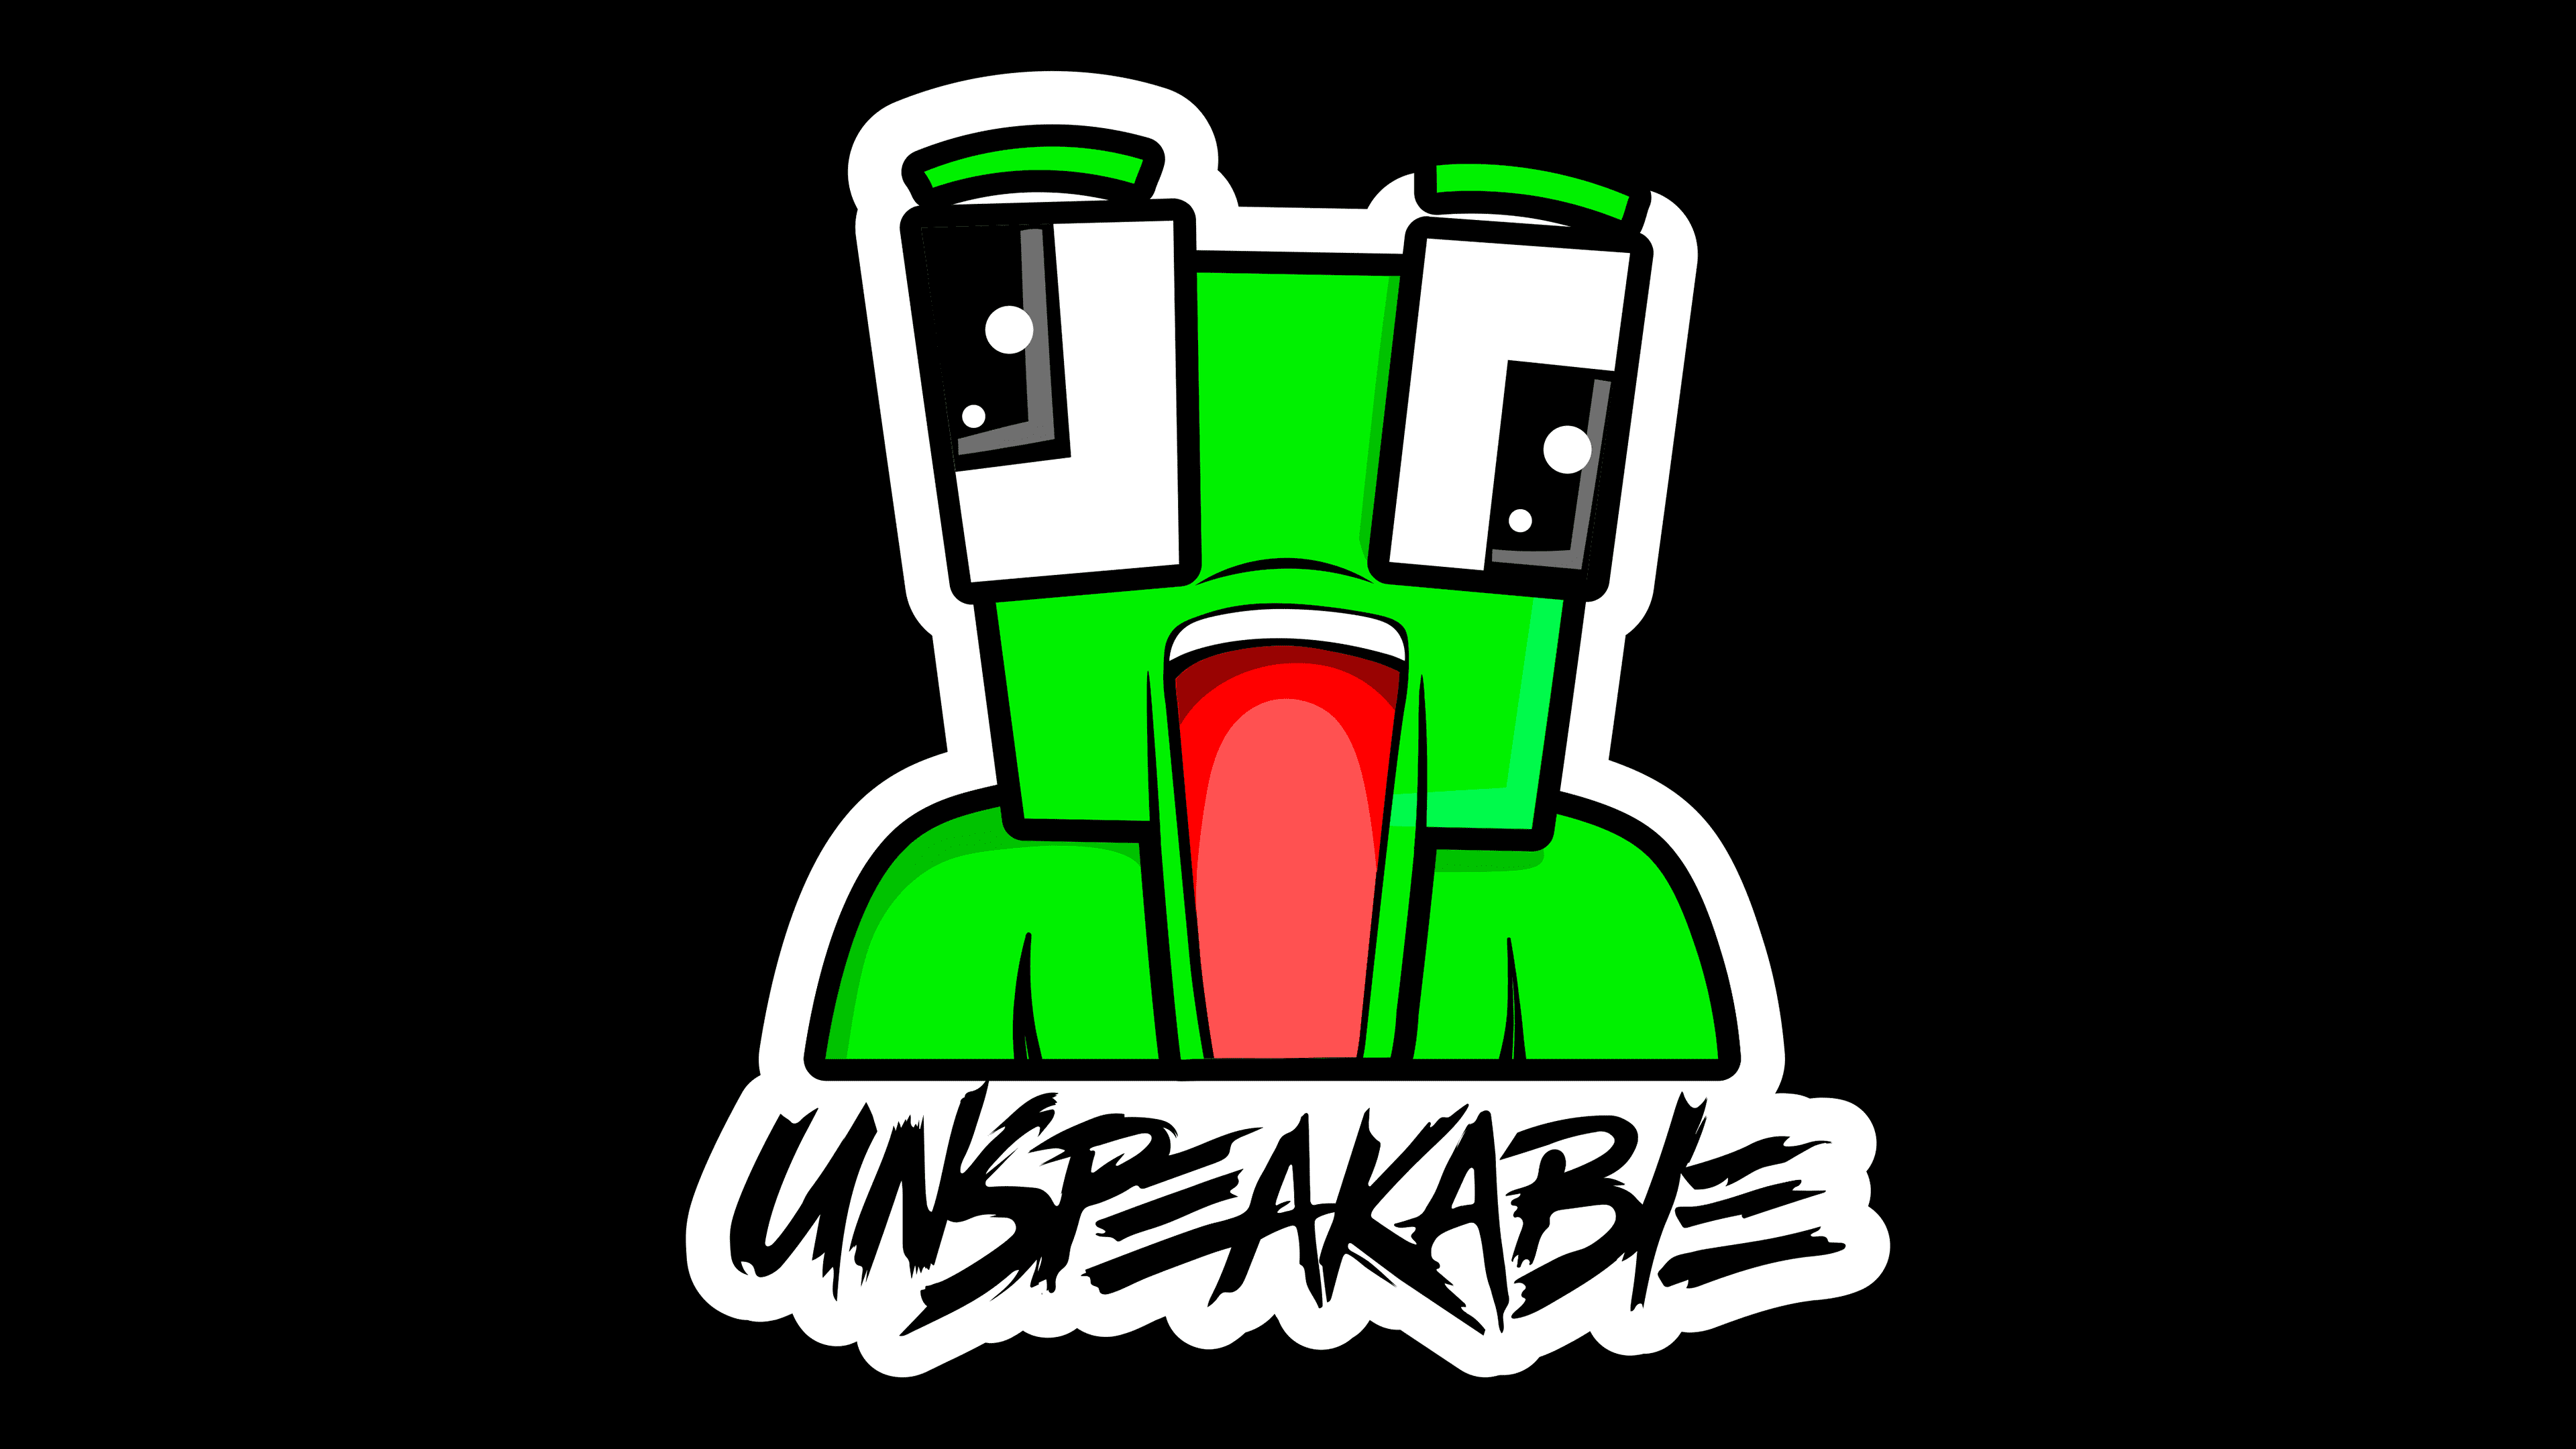 Unspeakable Logo, symbol, meaning, history, PNG, brand